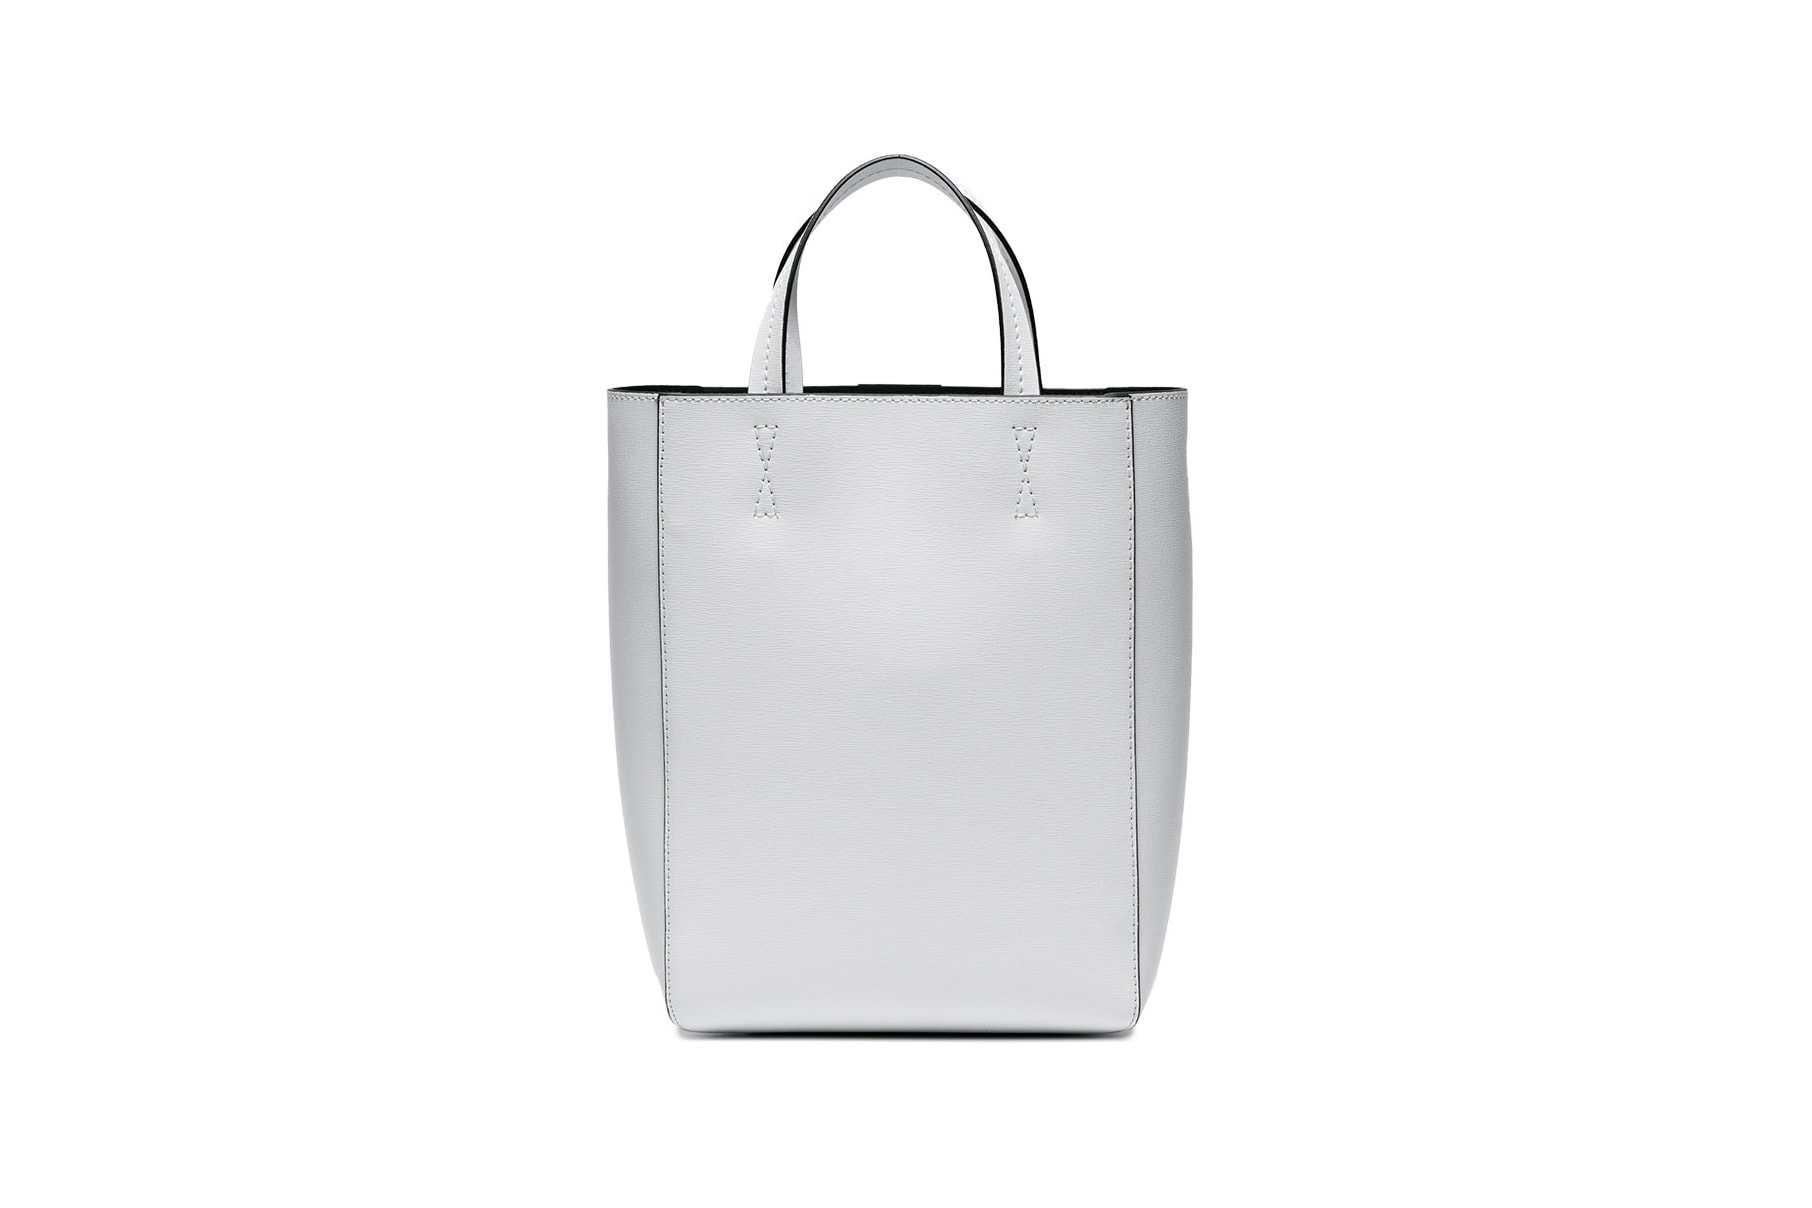 Off-White™ Sculpture Tote Bag White Colorway Industrial Strap Leather Bag Virgil Abloh